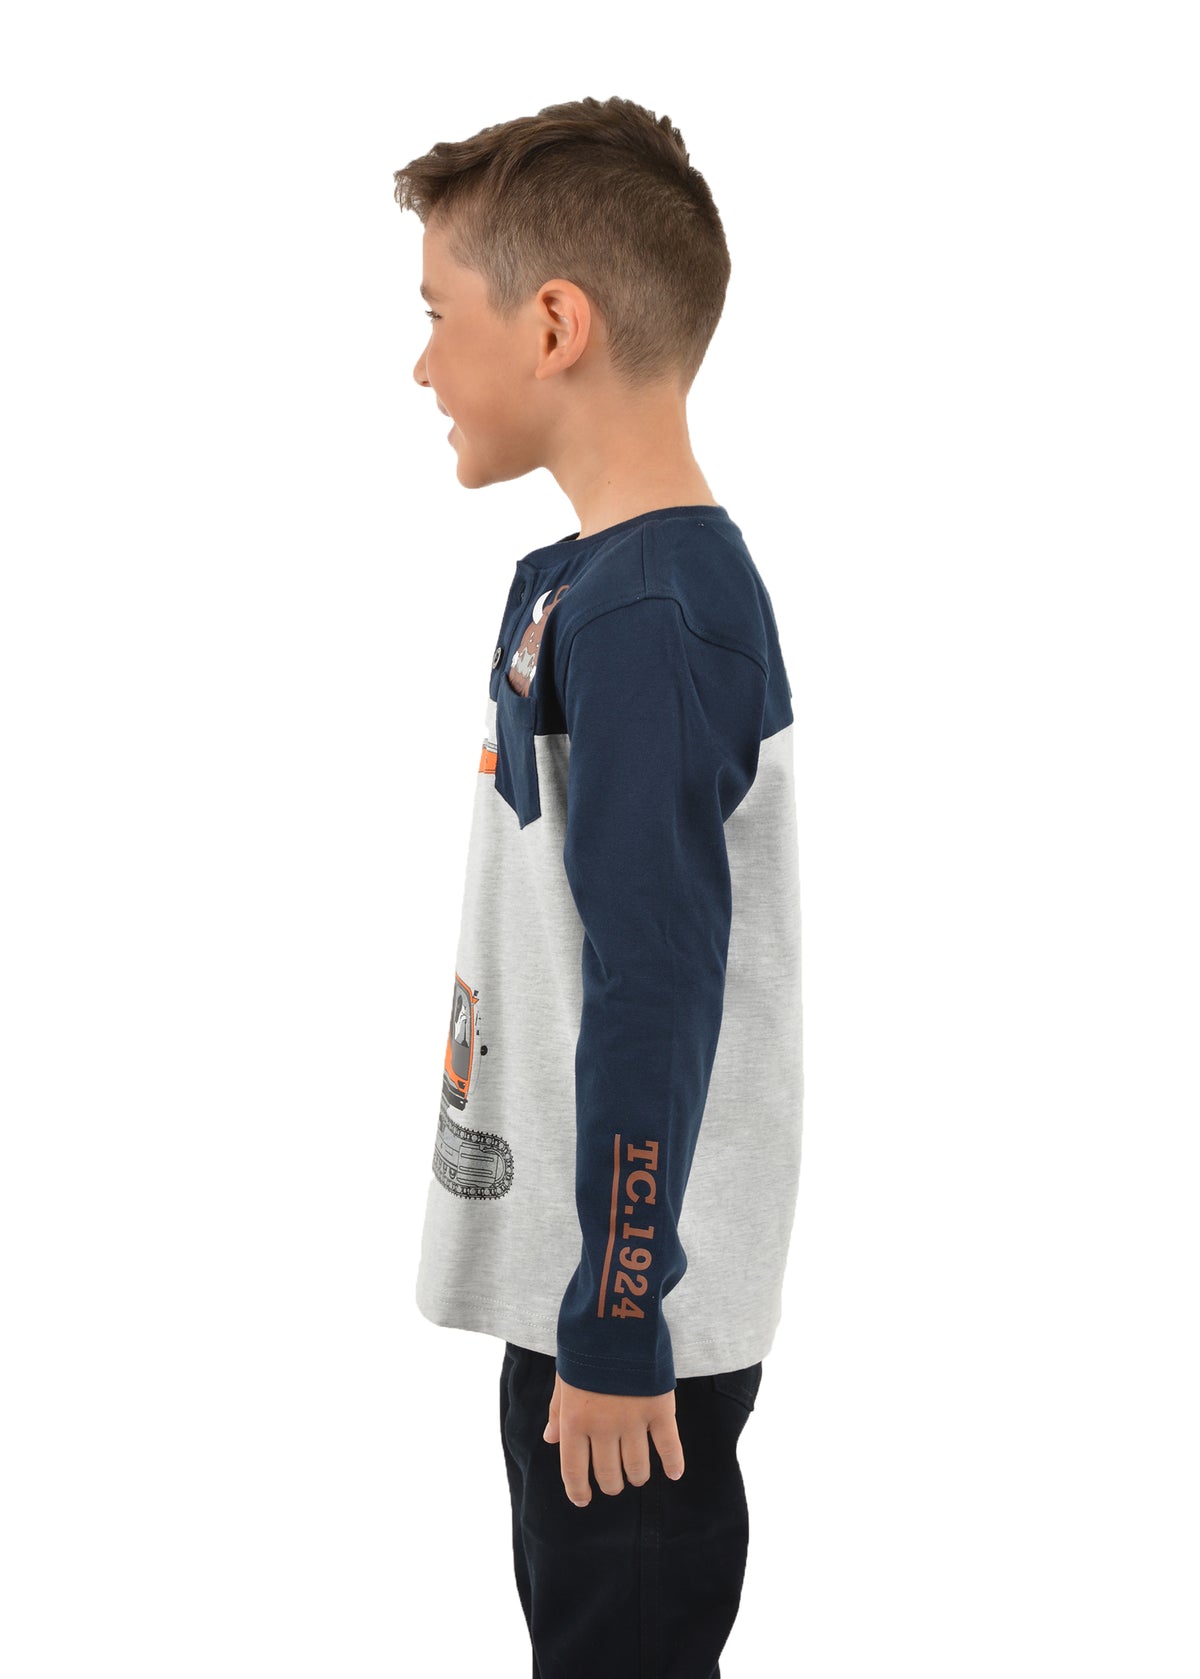 Thomas Cook Boys High In The Sky Henley Tee - Navy/White Marle